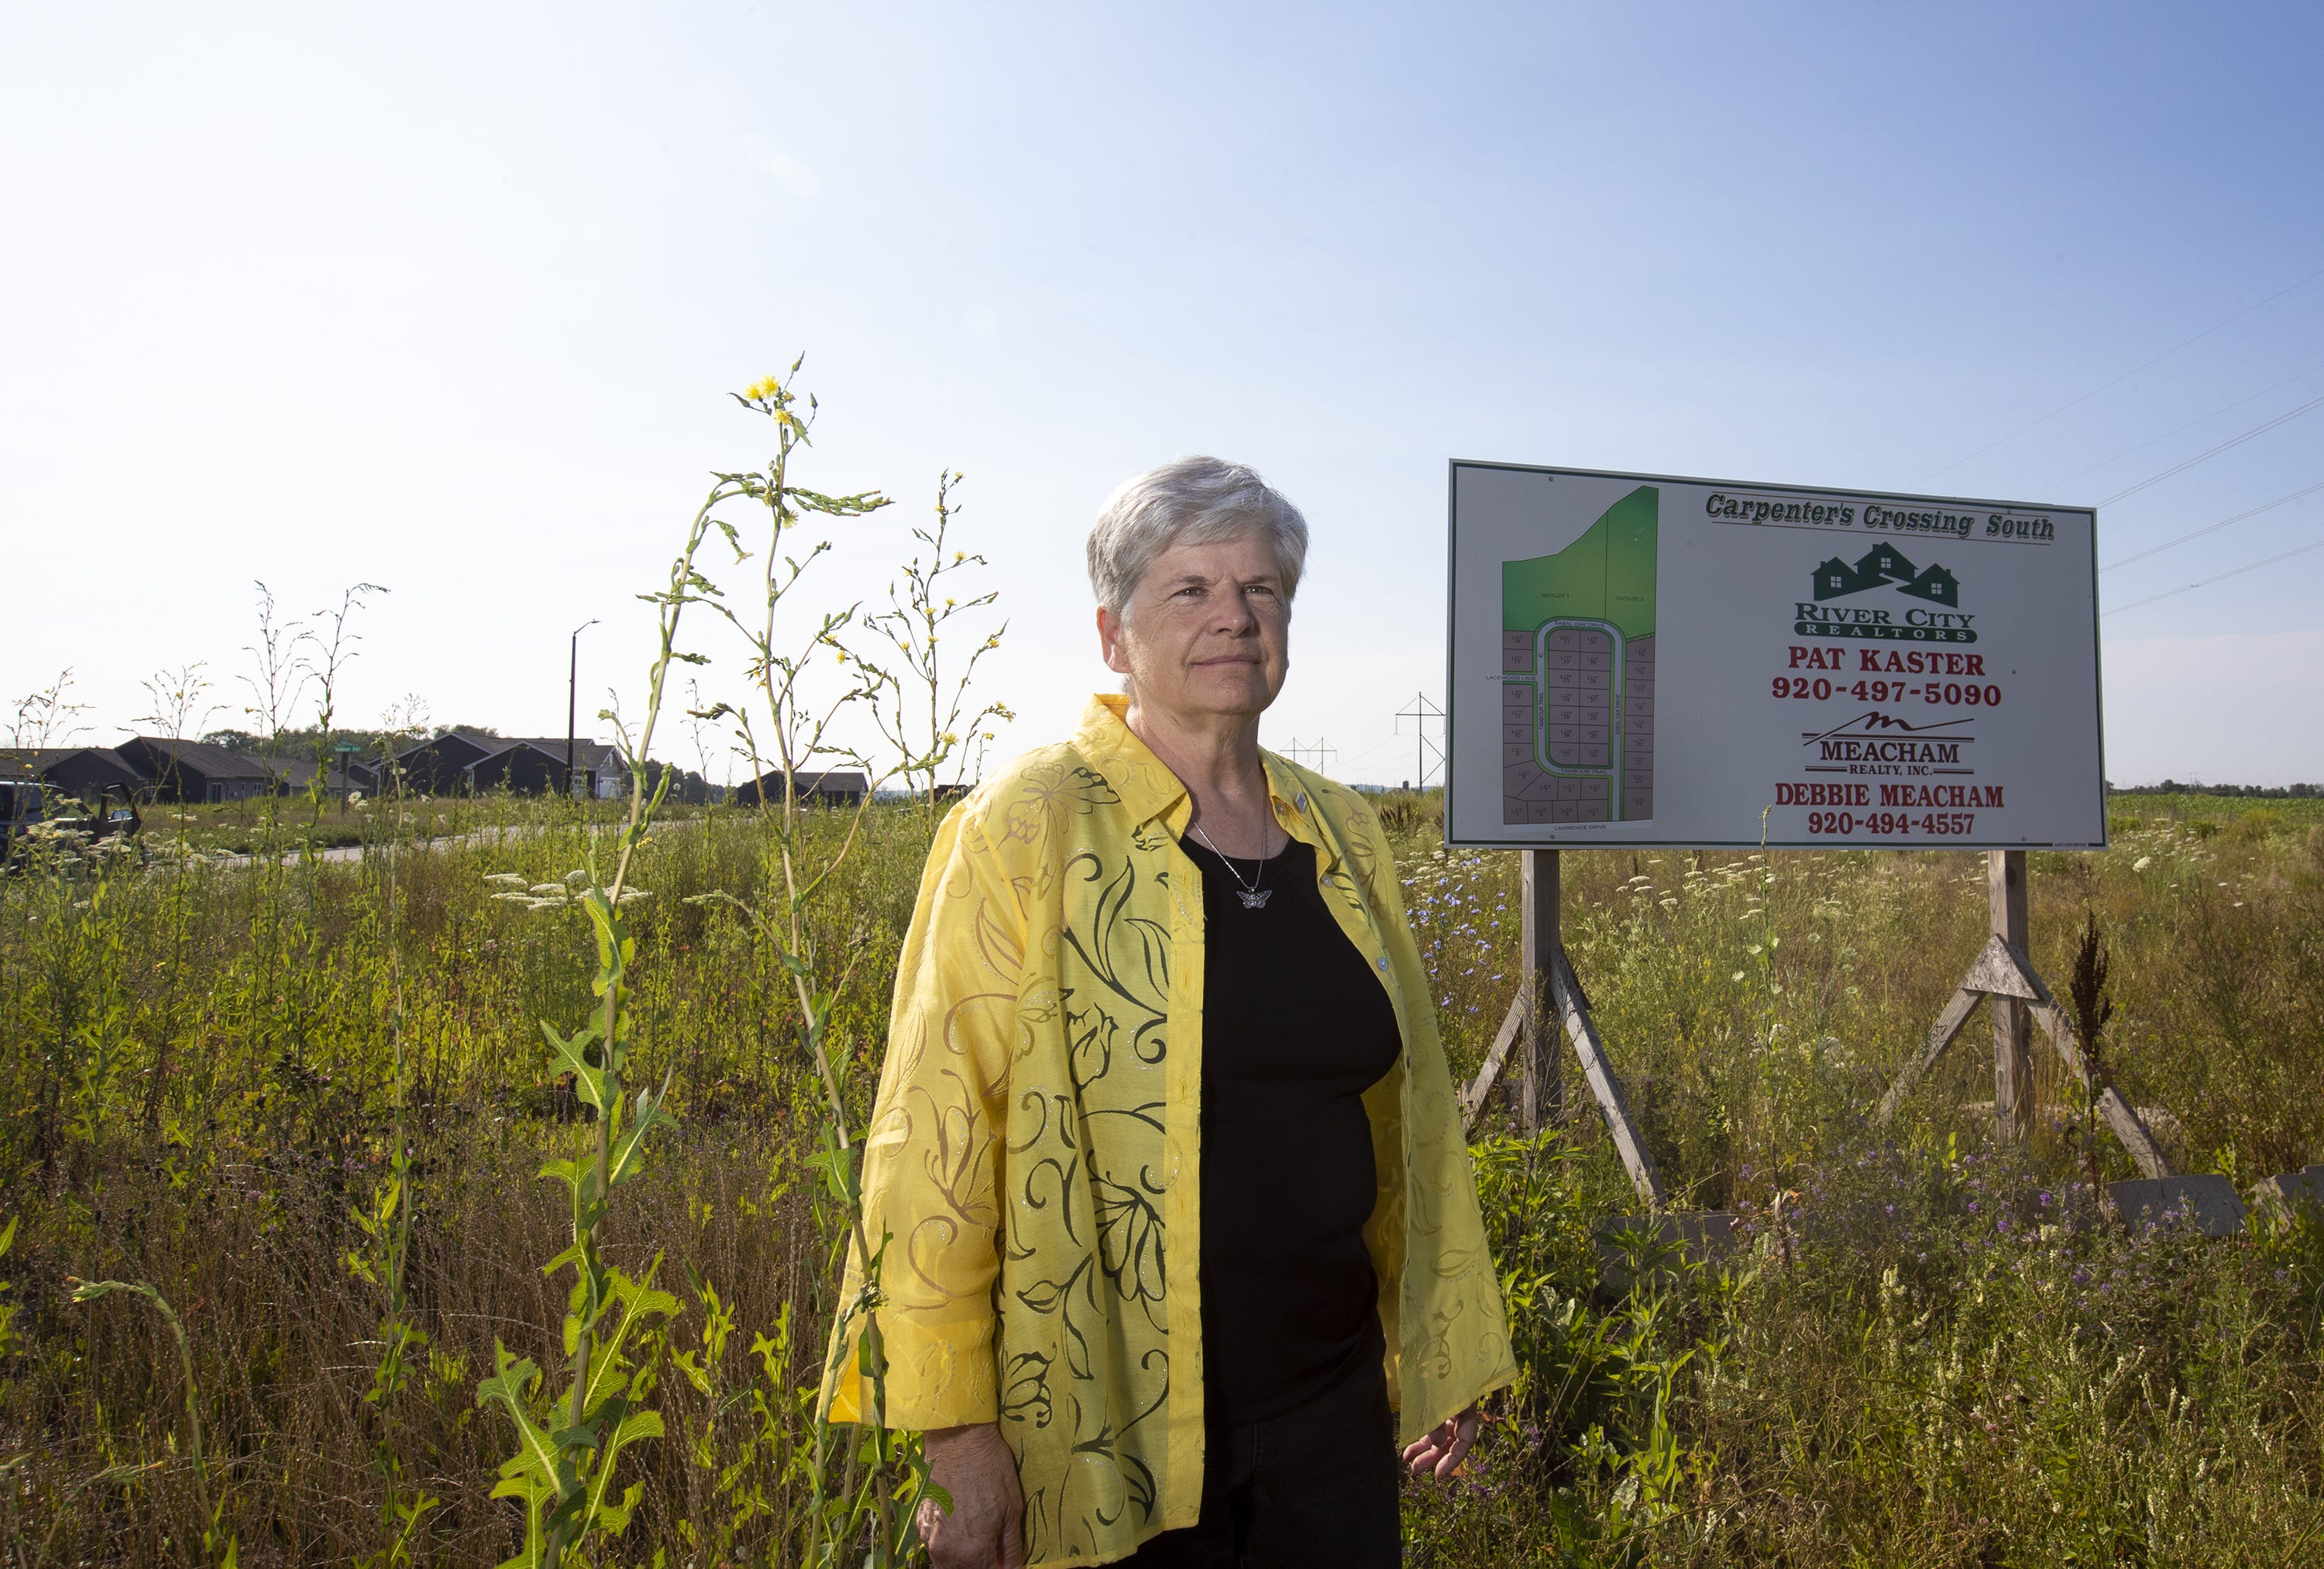 Pat Kaster owner of River City Realtors poses for a portrait at Carpenter's Crossing South, Friday, July 16, 2021, De Pere, Wis. Samantha Madar/USA TODAY NETWORK-Wisconsin